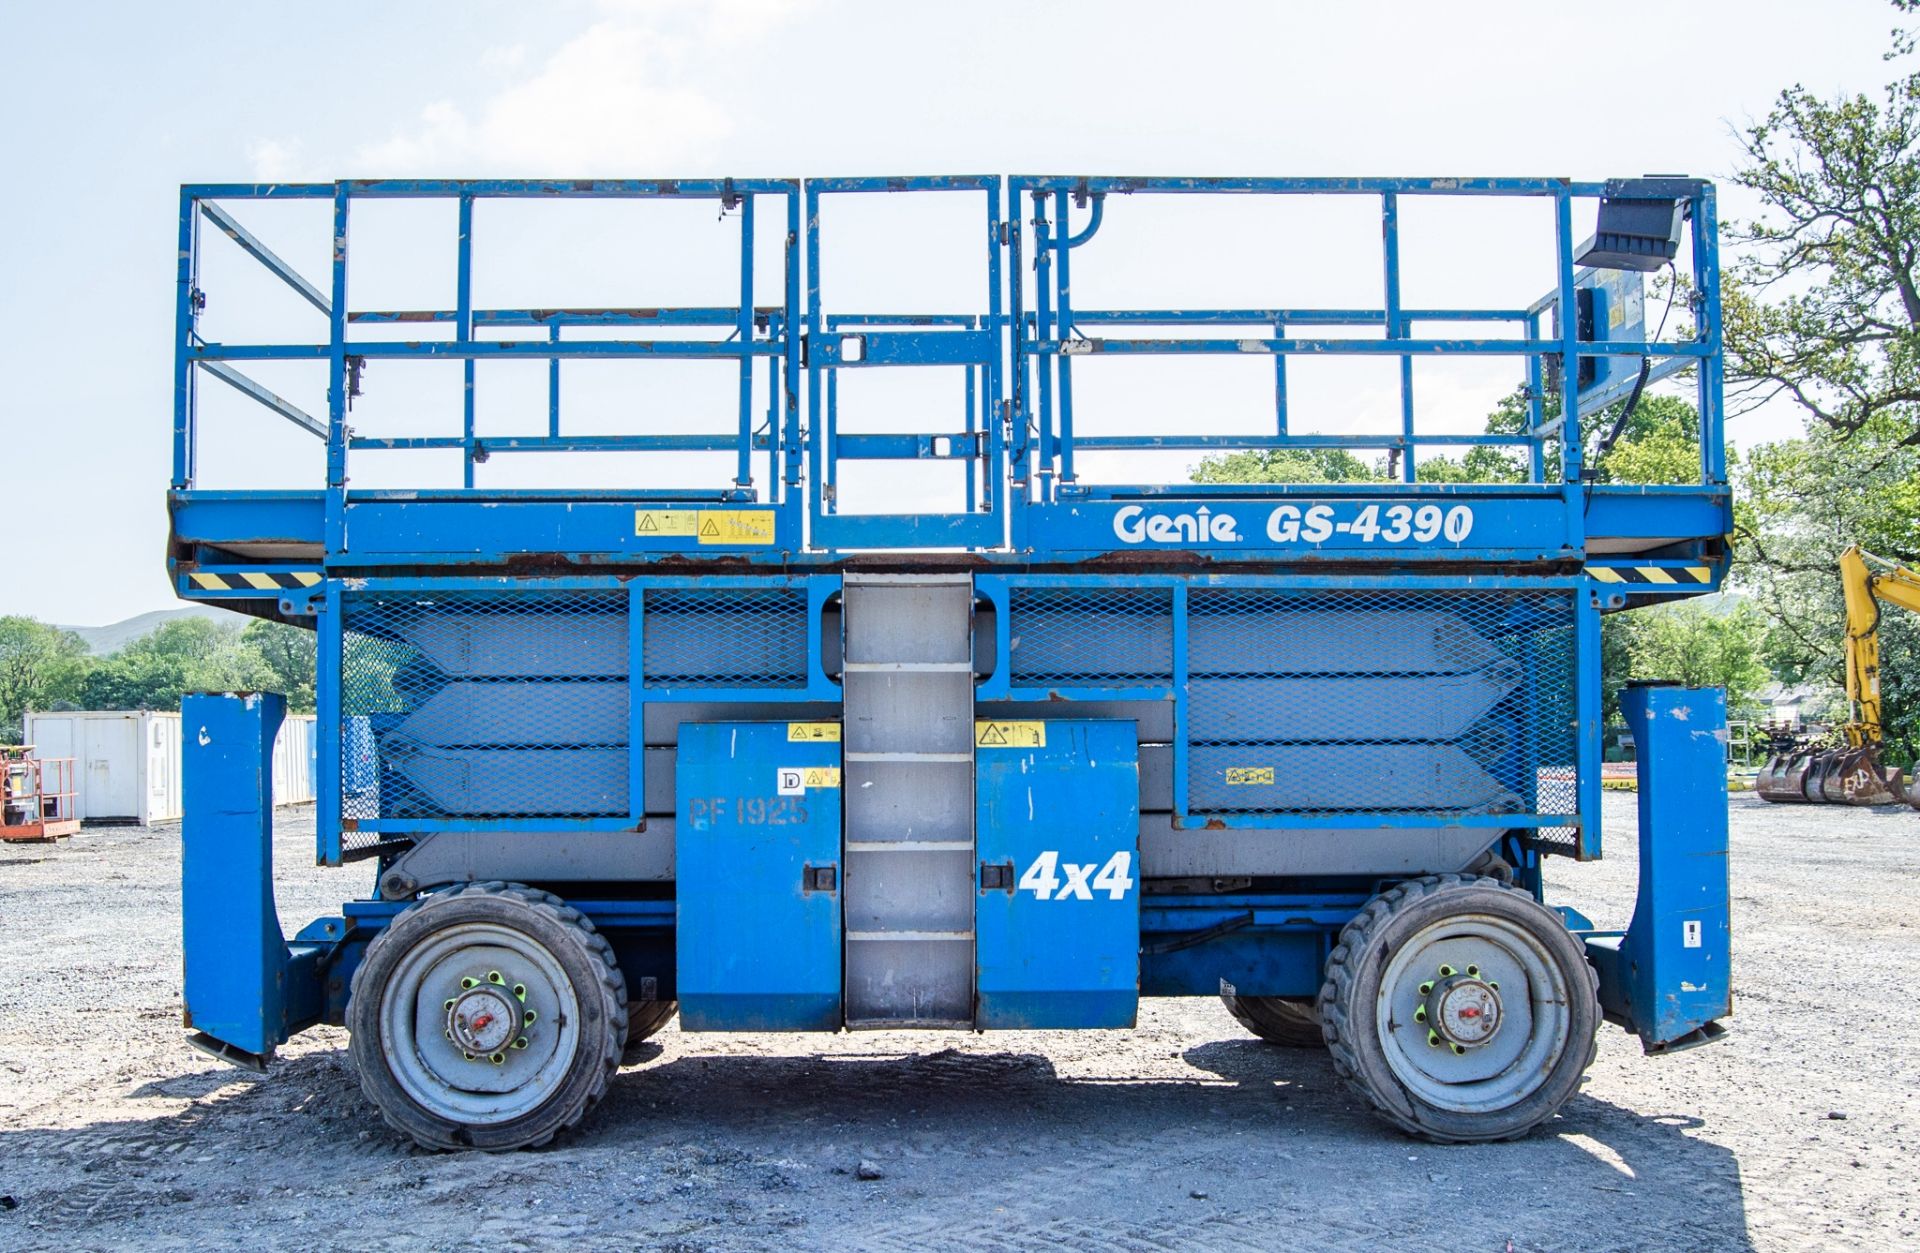 Genie GS4390 diesel driven scissor lift access platform Year: 2014 S/N: 49379 Recorded Hours: 1886 - Image 8 of 17